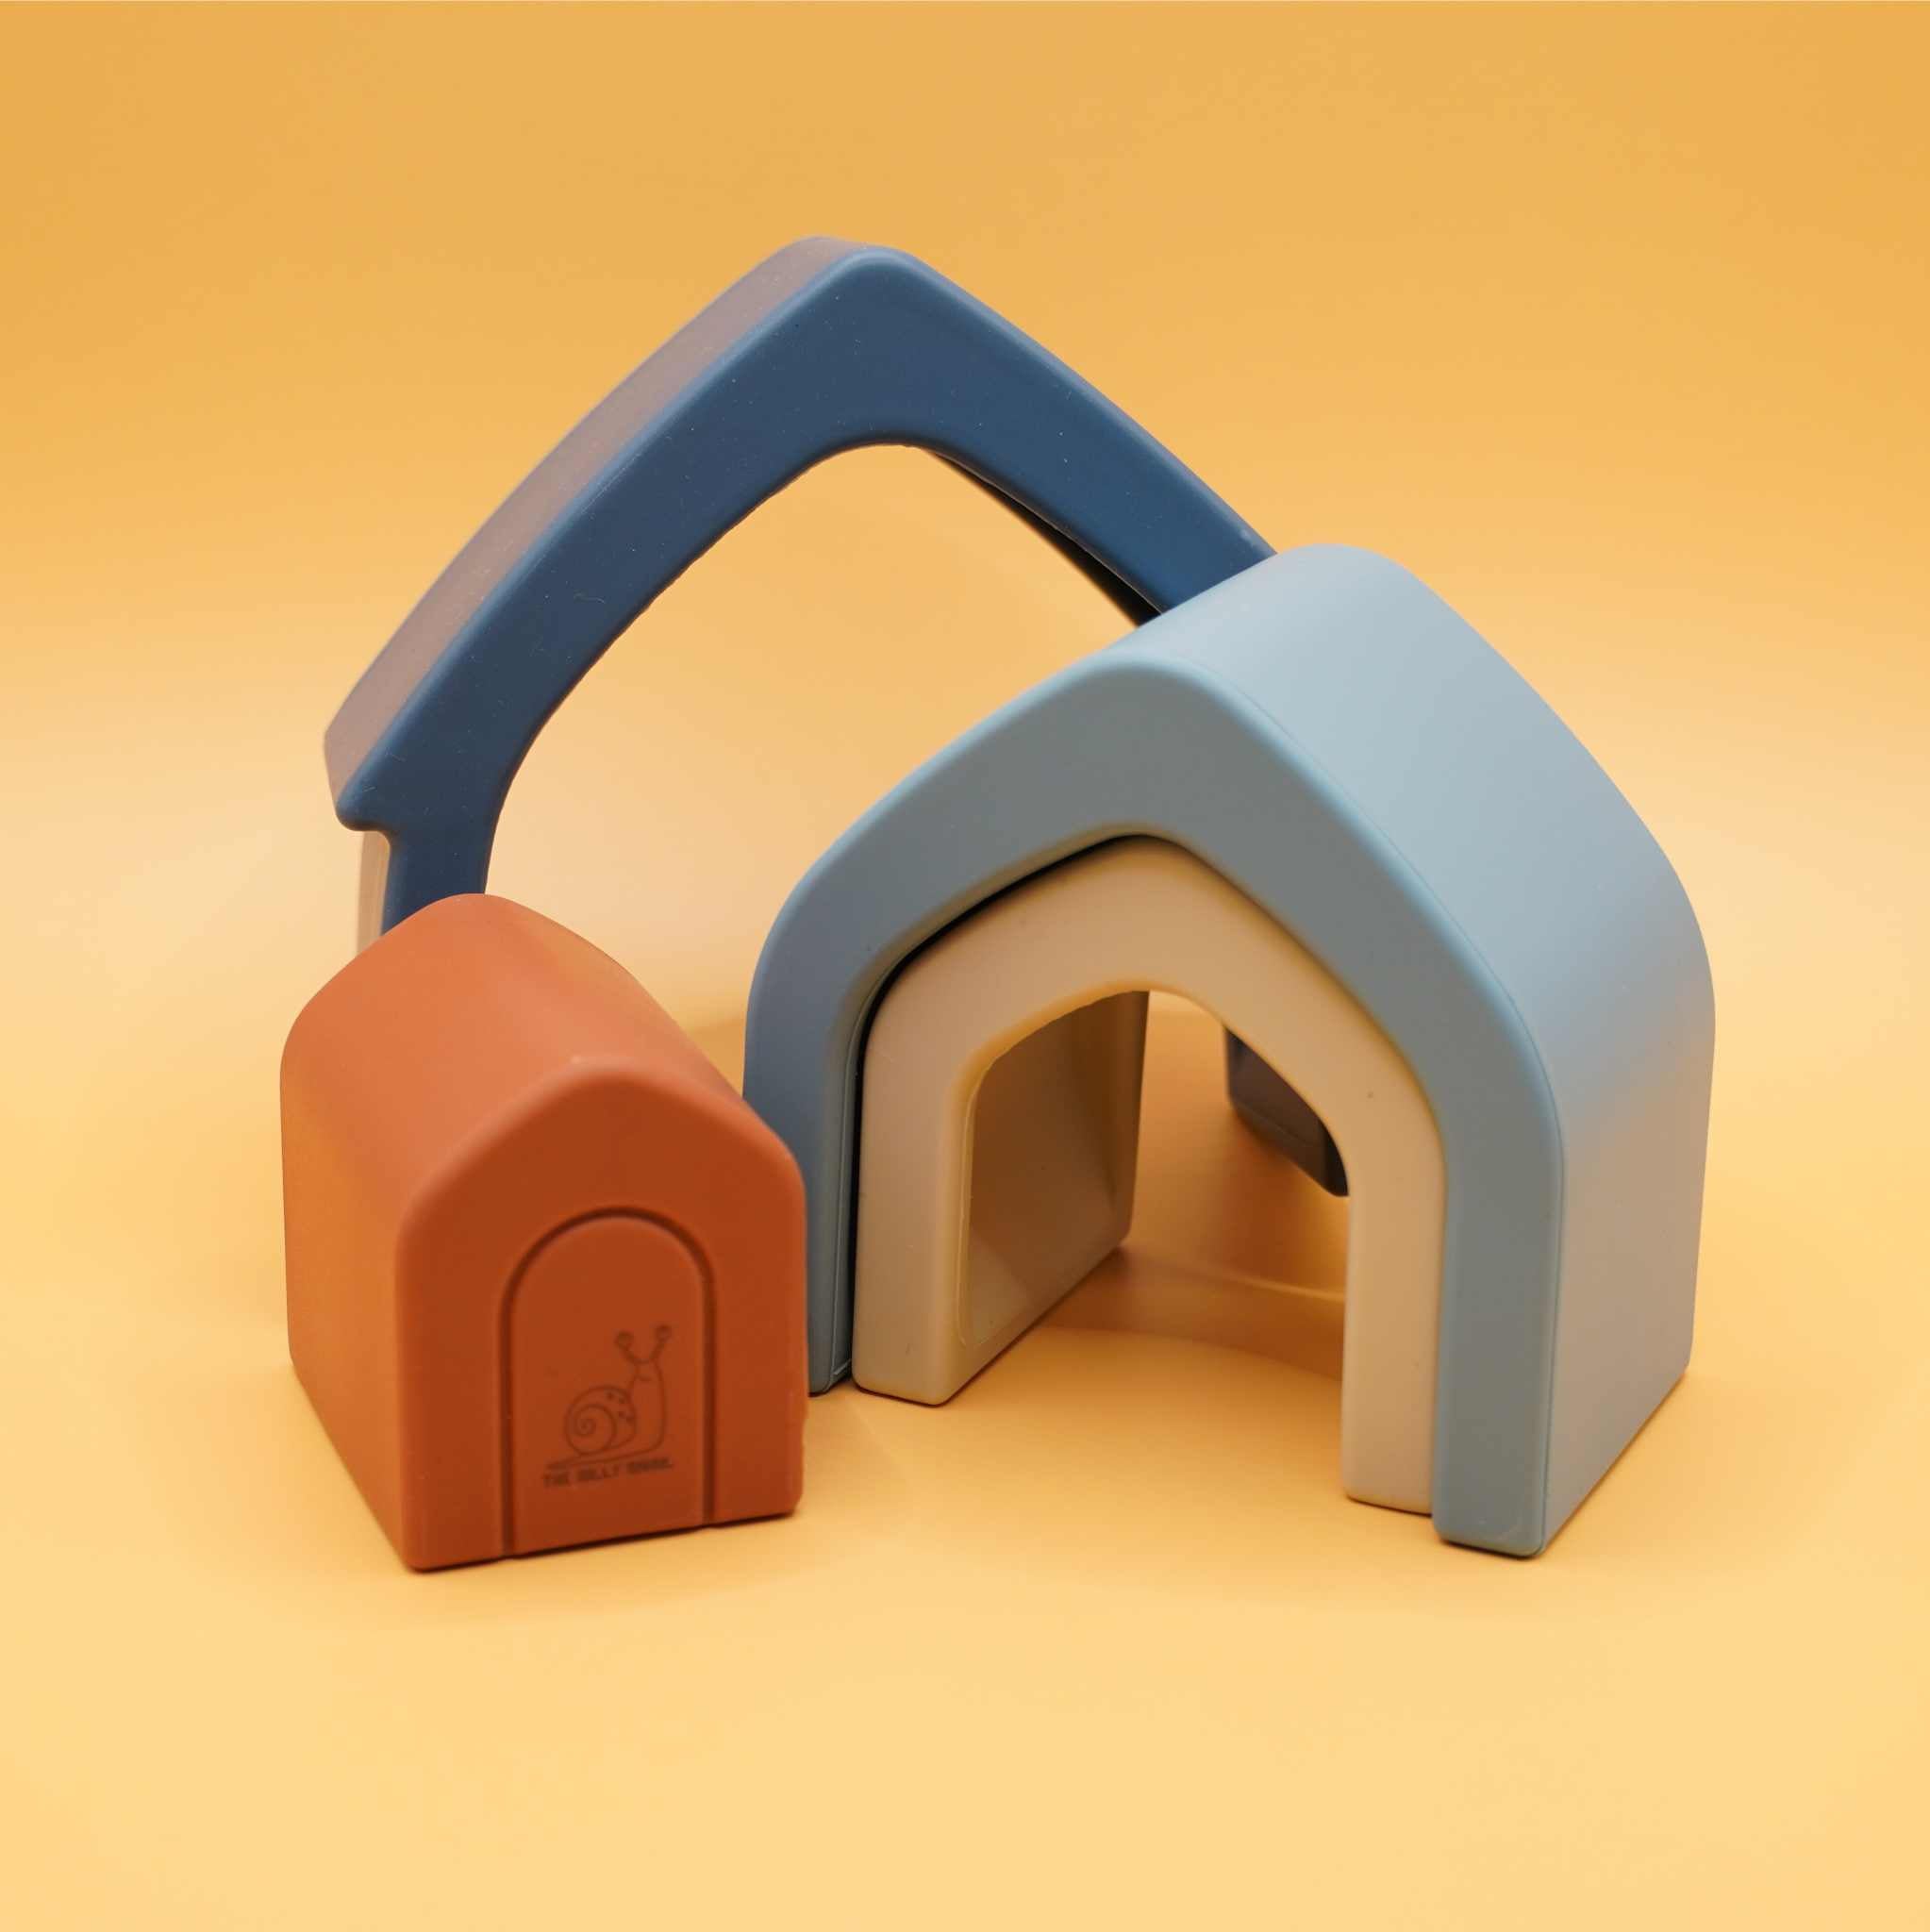 Home shaped silicone stacking toy with pieces separated